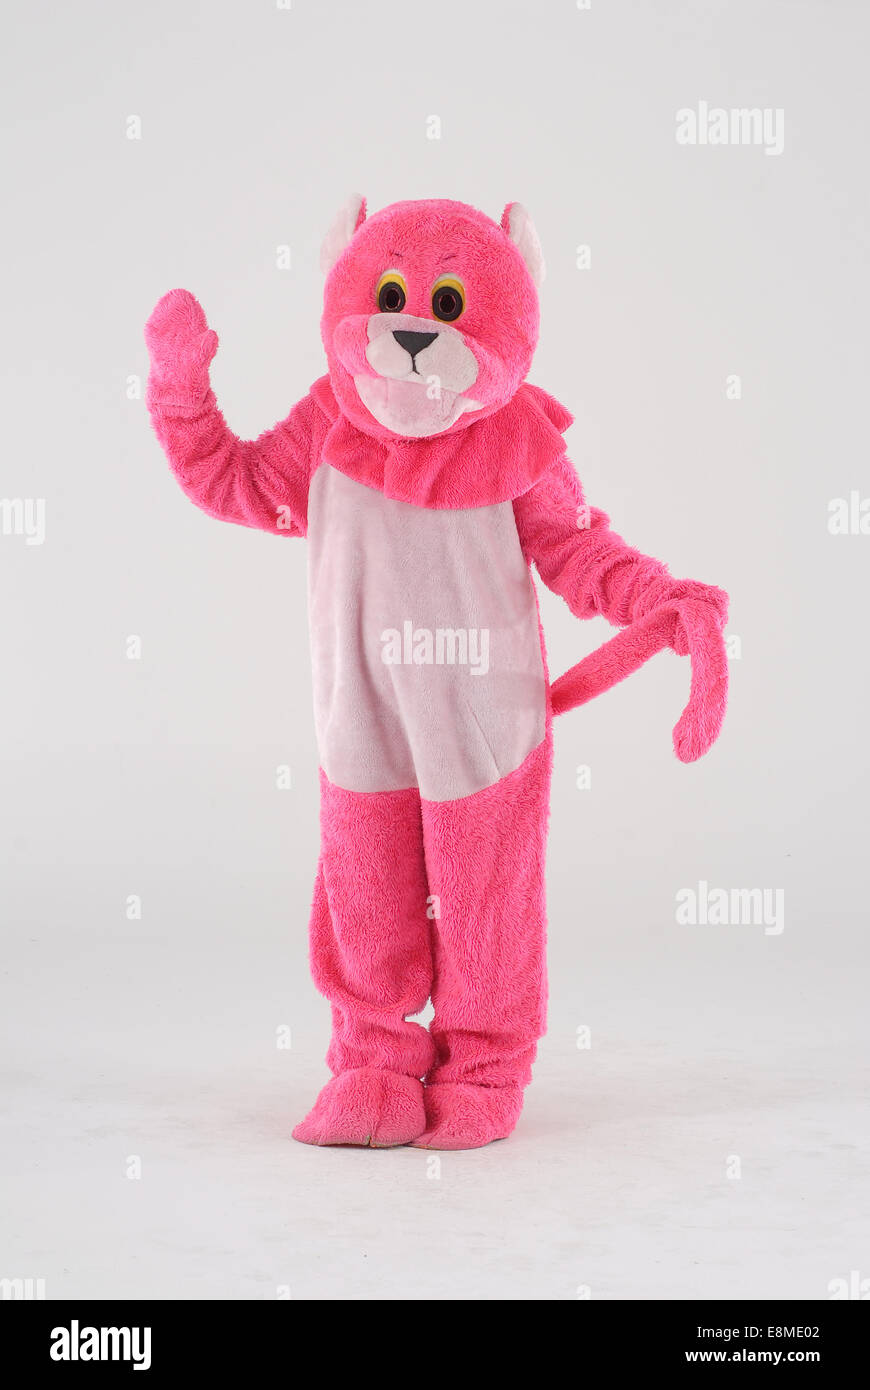 Fancy dress comedy costume pink bagpuss / tiger / cat / panther animal outfit Stock Photo